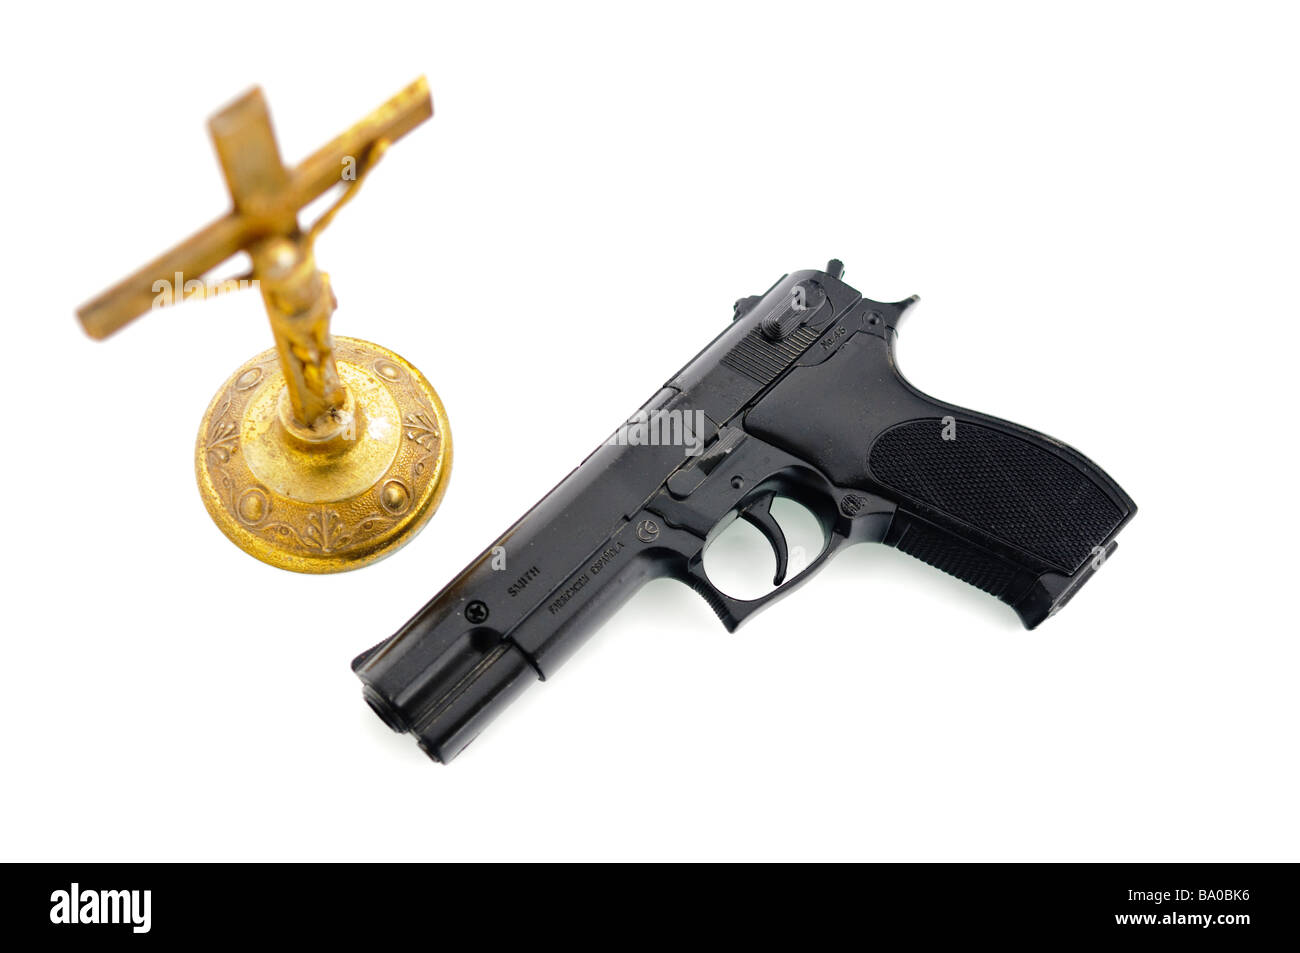 Handgun beside an old brass crucifix NOTE Handgun is imitation toy and marked accordingly Stock Photo